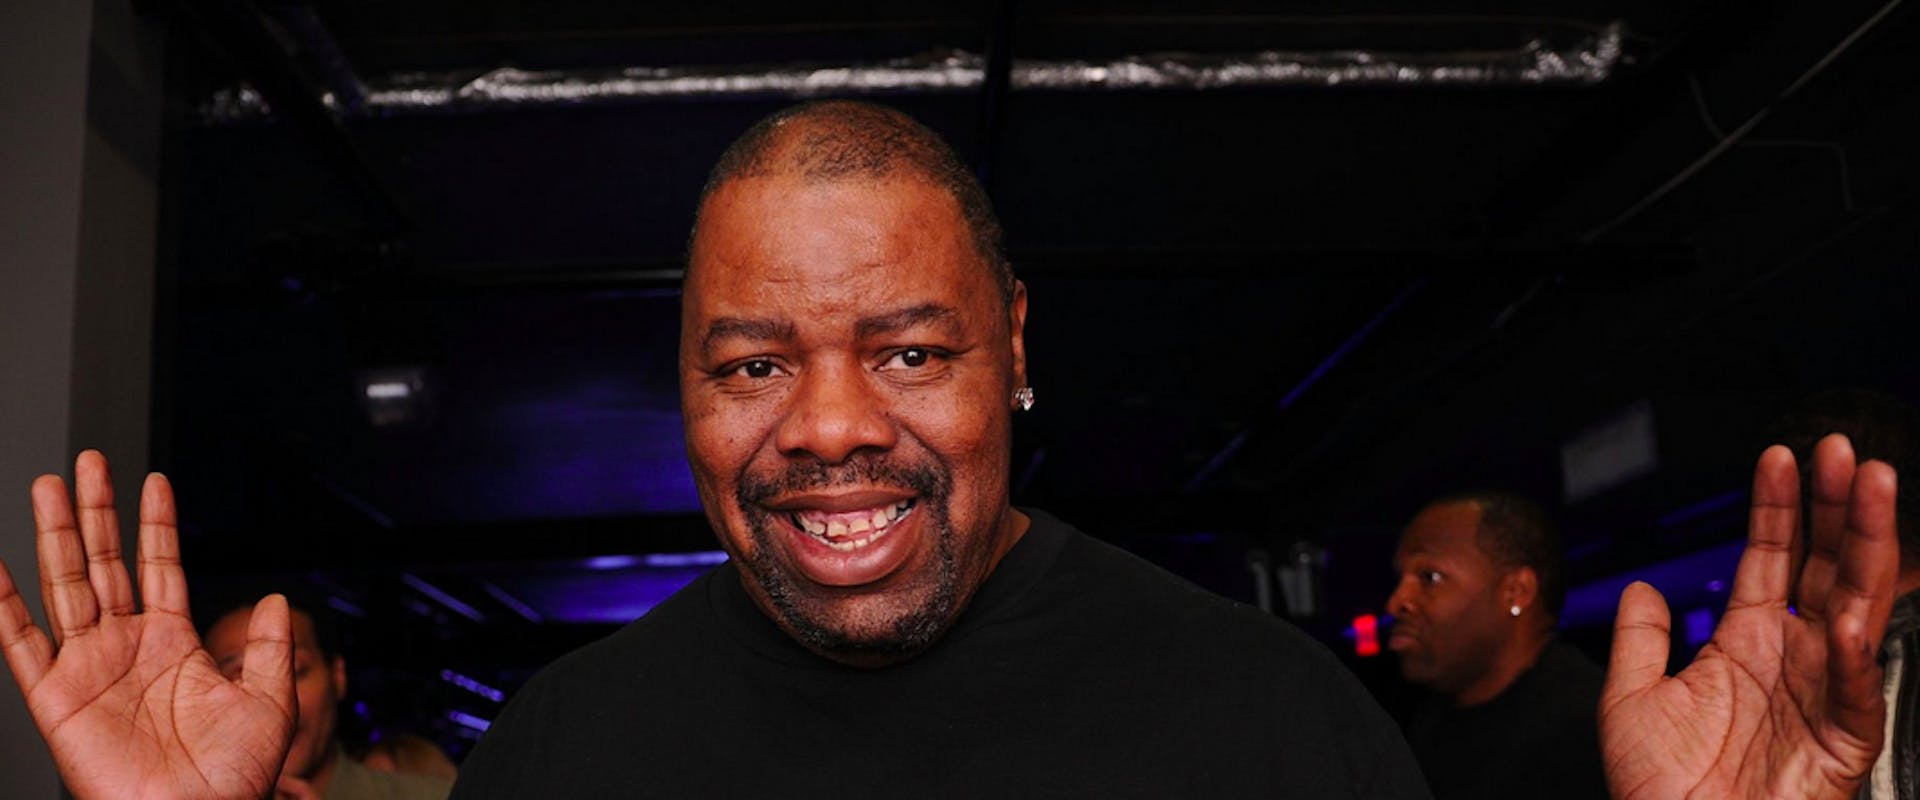 NEW YORK, NY - MAY 19: DJ Biz Markie attends 2014 Hip Hop Hall of Fame Awards at Stage 48 on May 19, 2014 in New York City. 